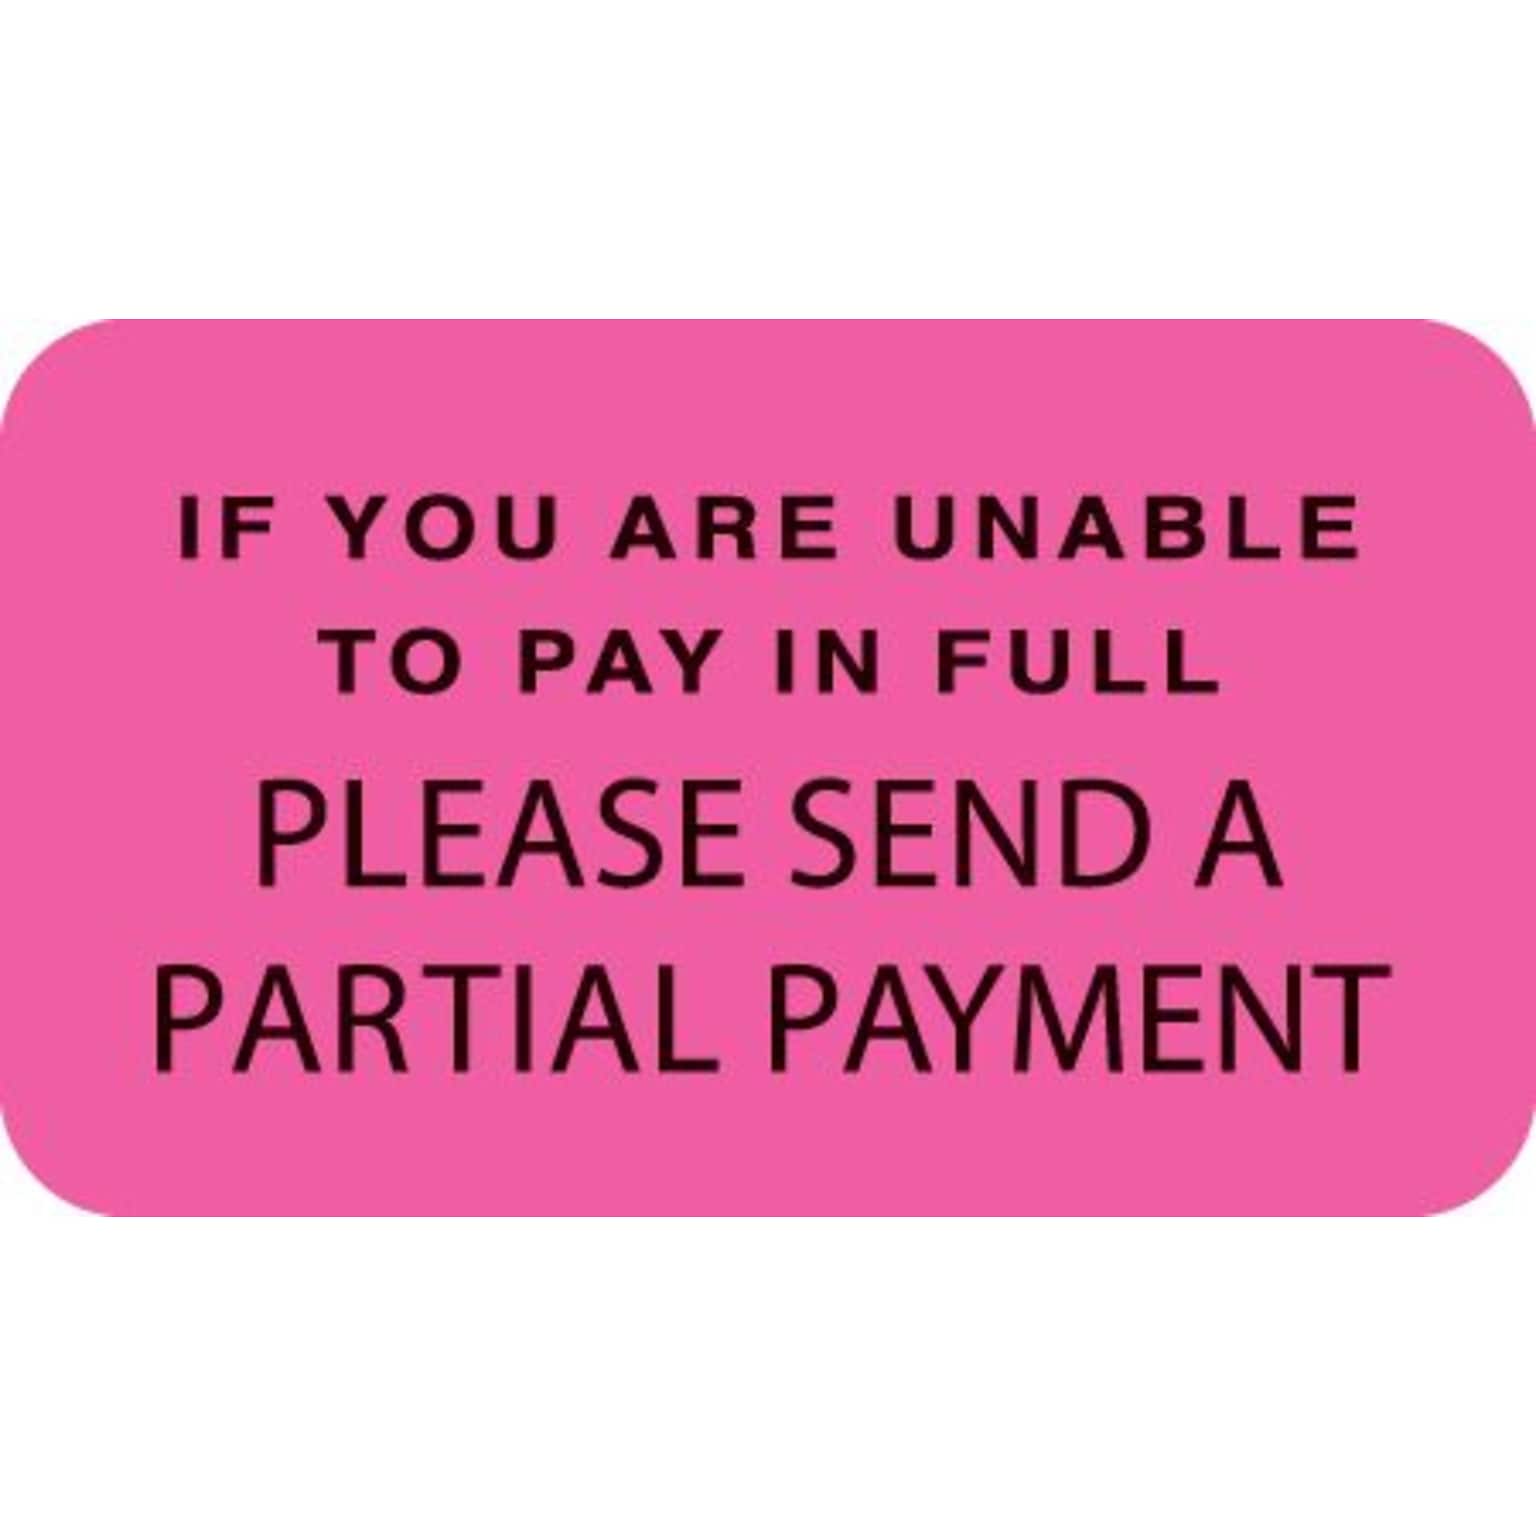 Medical Arts Press® Reminder & Thank You Collection Labels, If Unable To Pay, Fl Pink, 7/8x1-1/2, 500 Labels